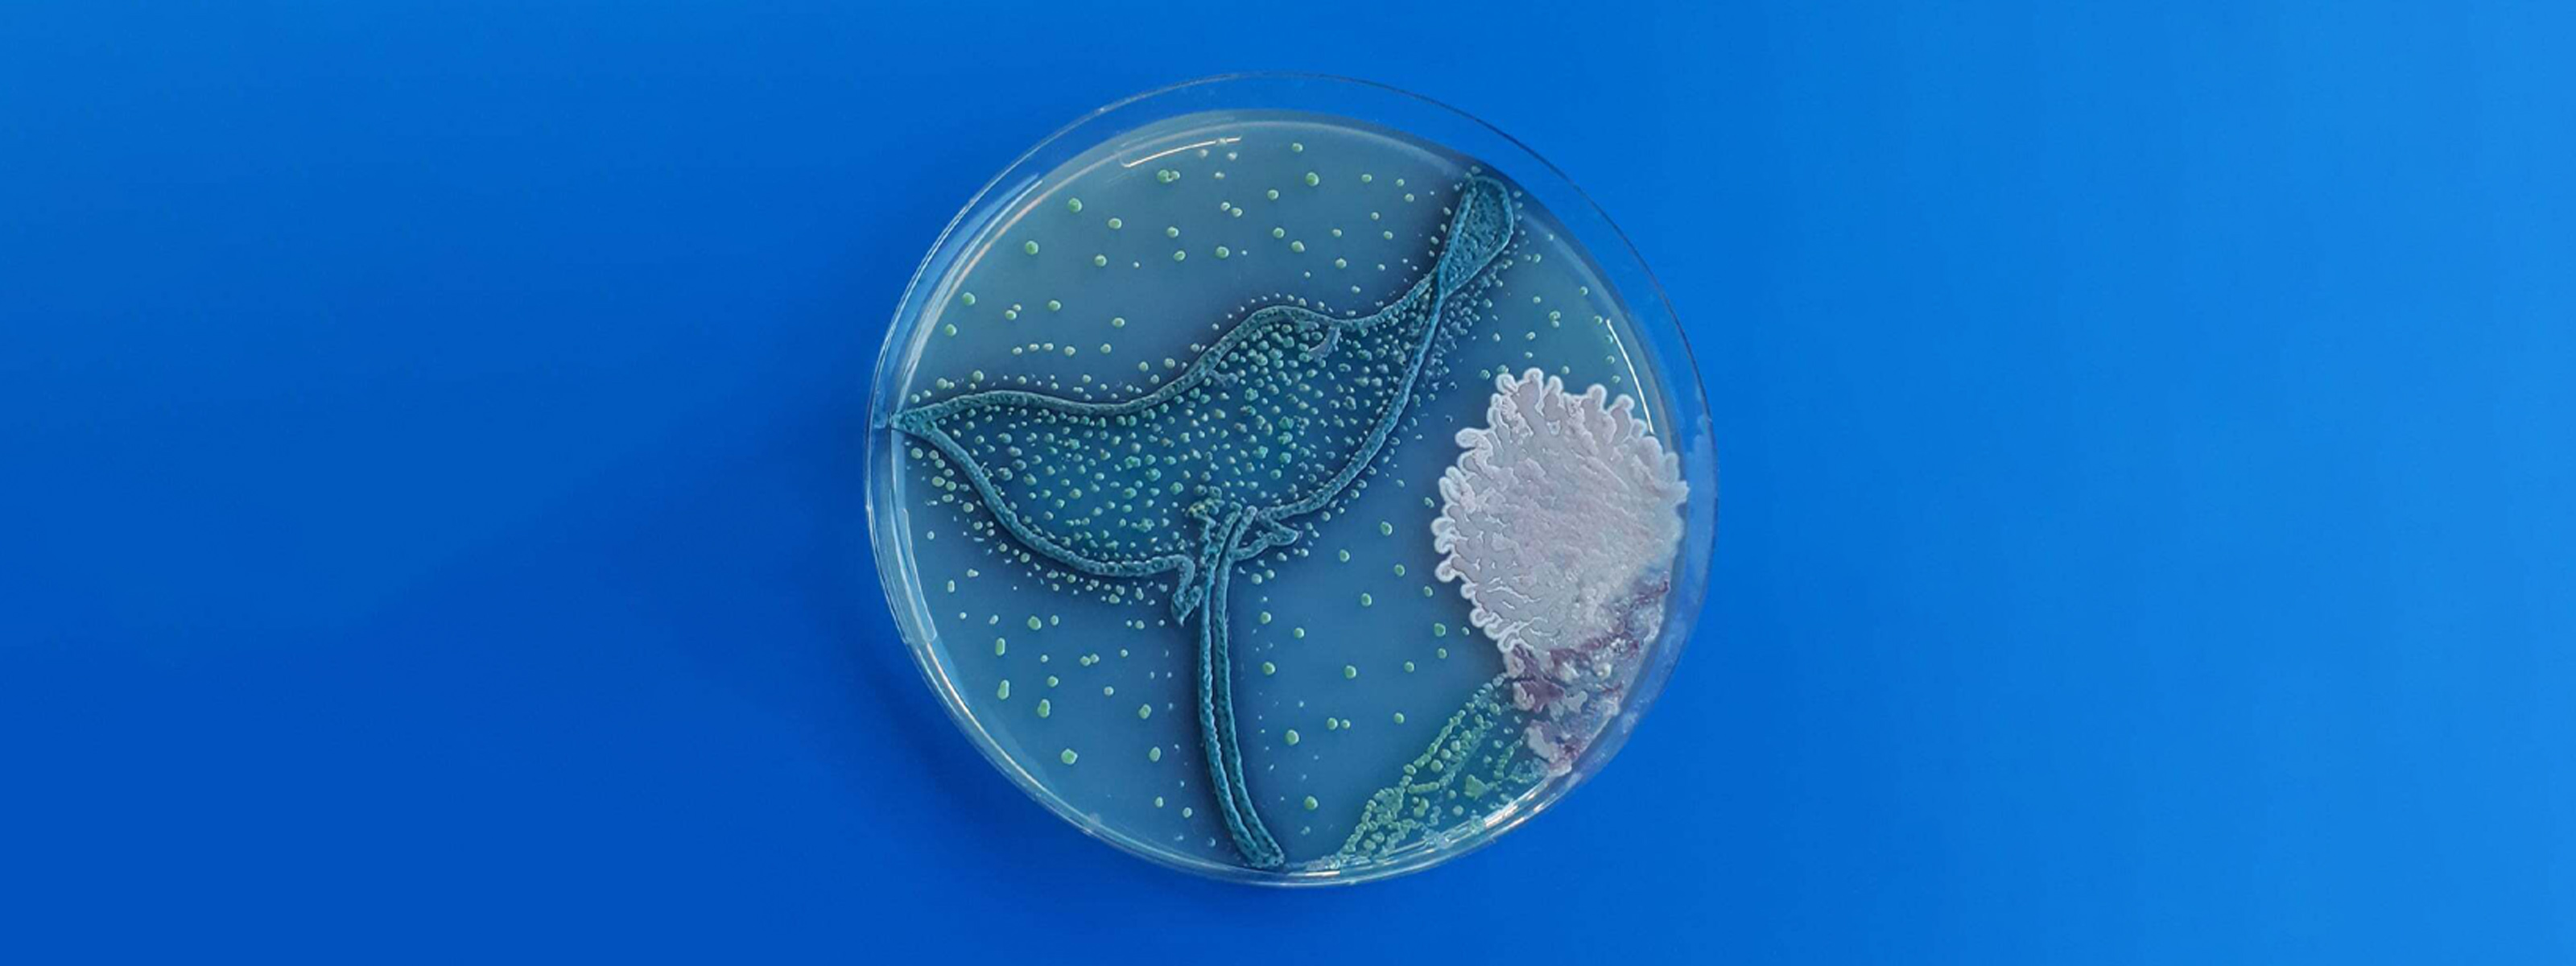 Stunning “agar art” grows pictures with bacteria and fungi